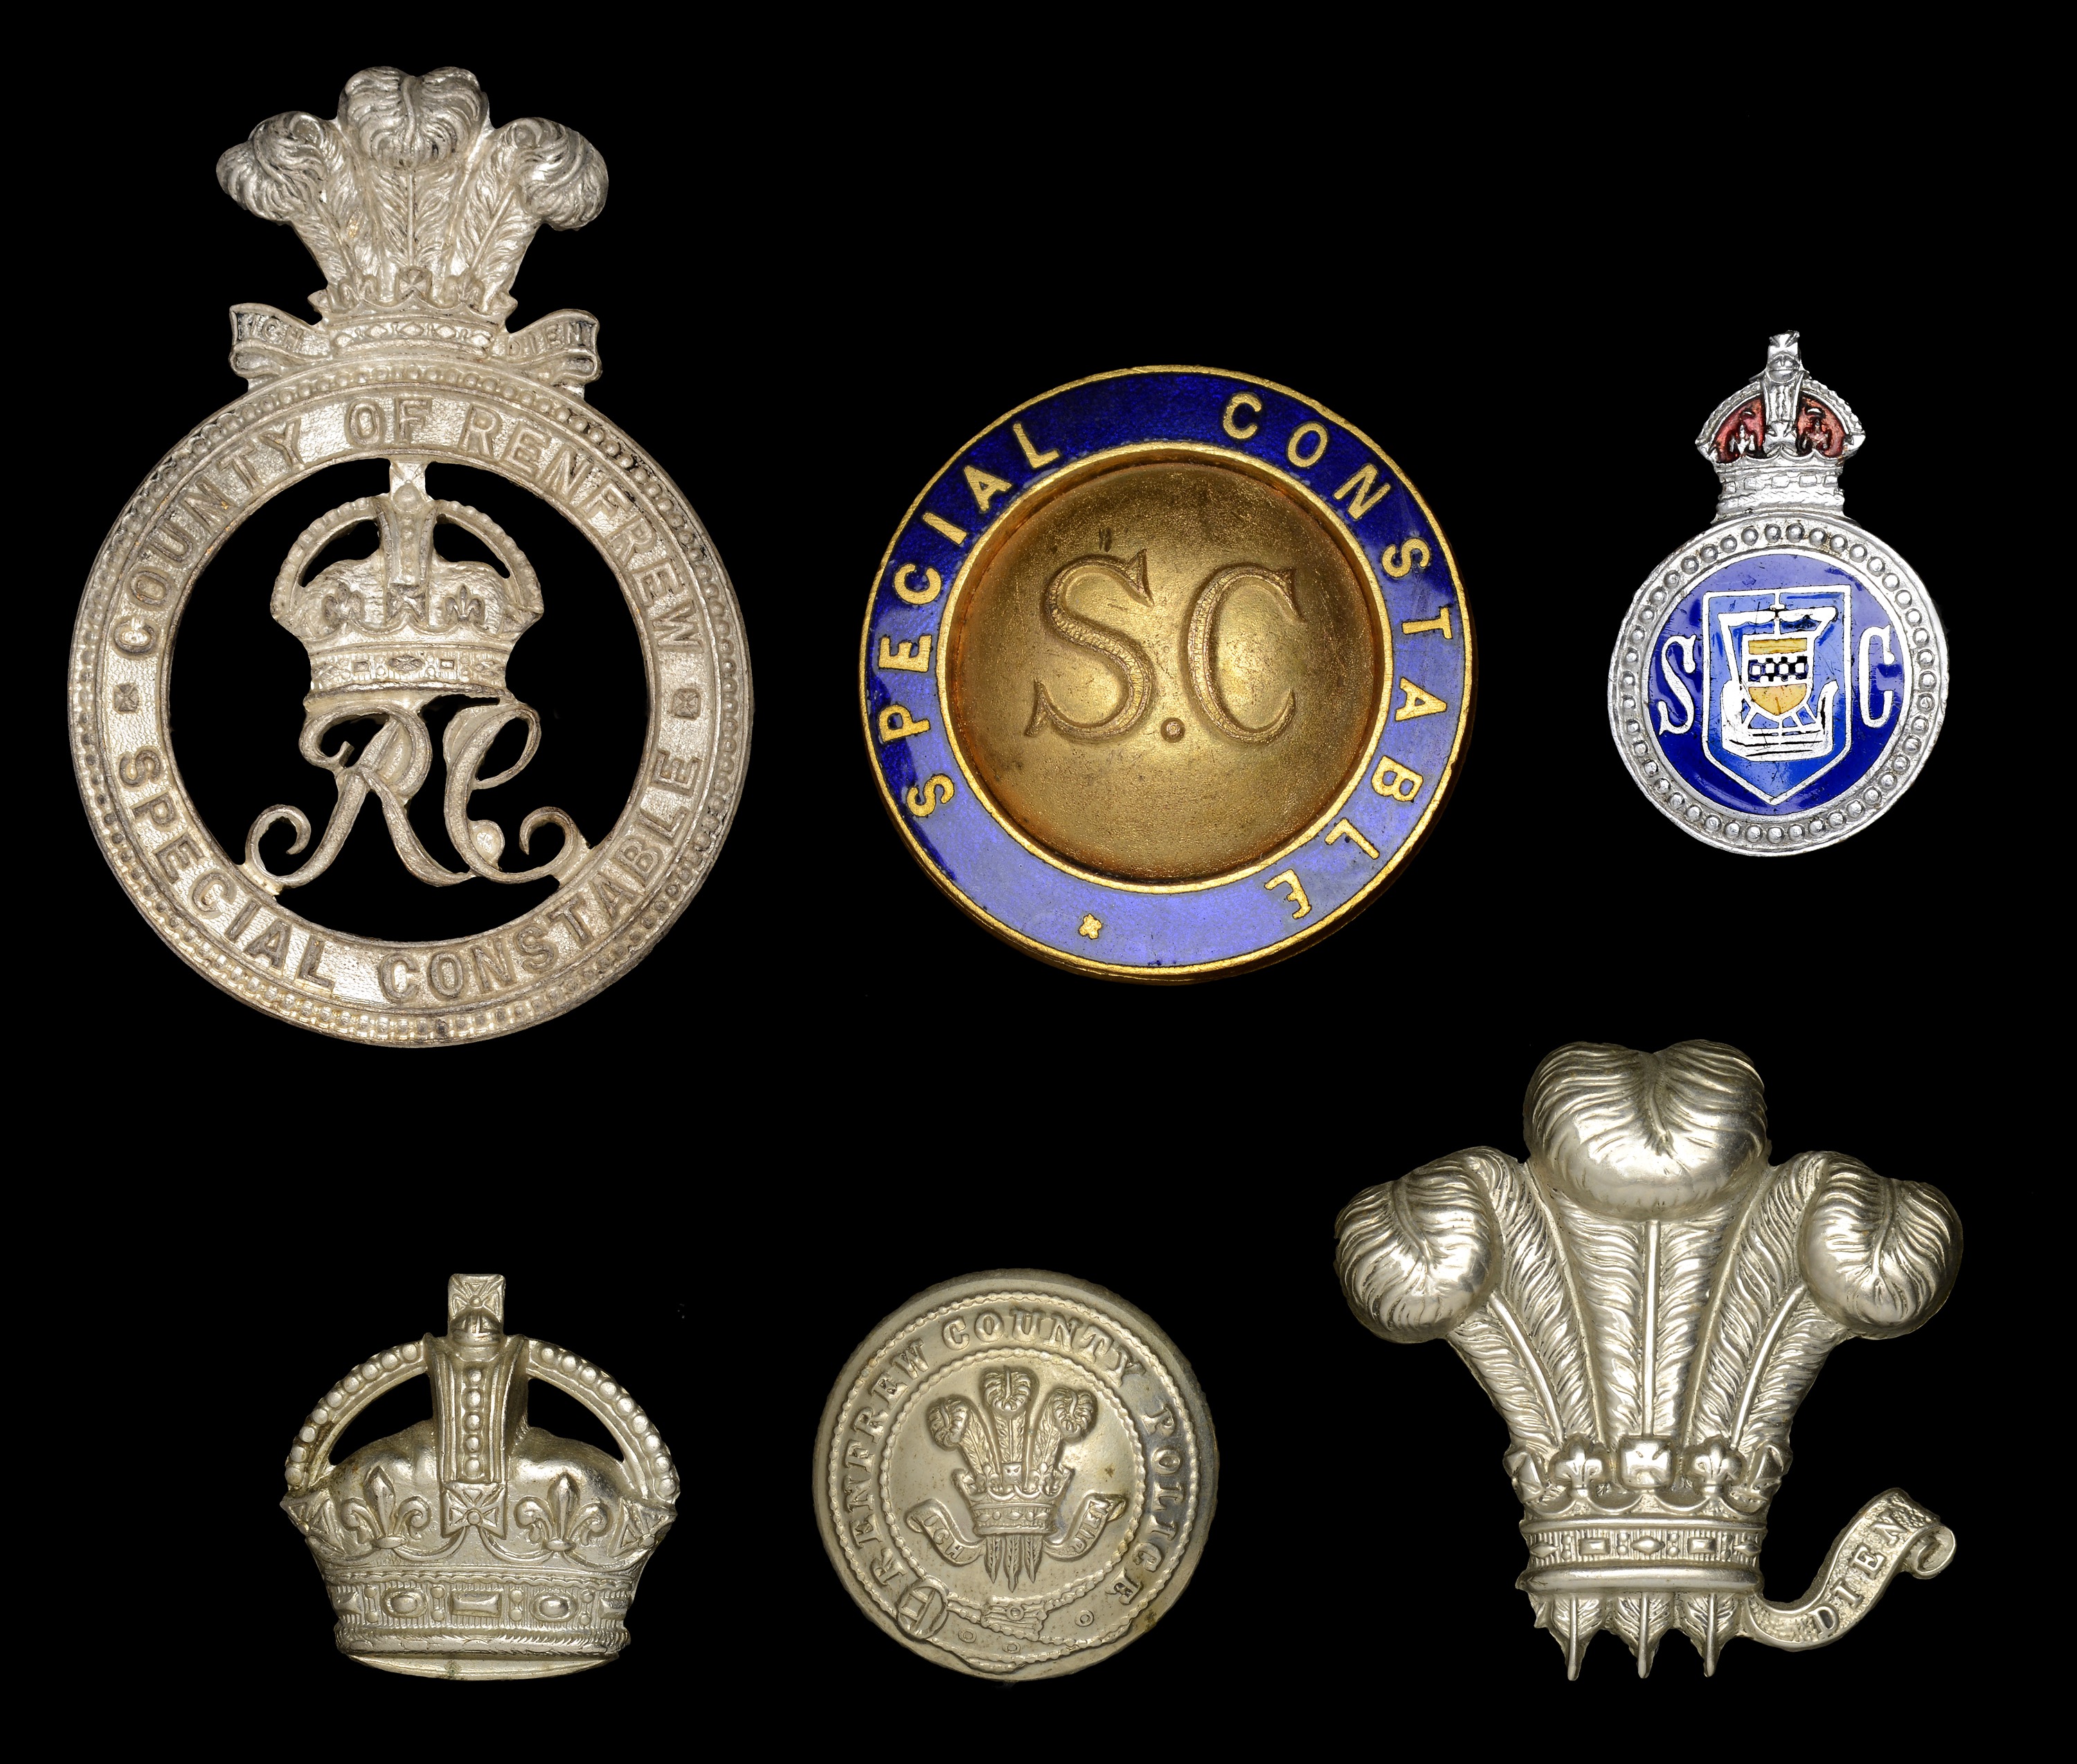 A small Collection of Scottish Police Badges